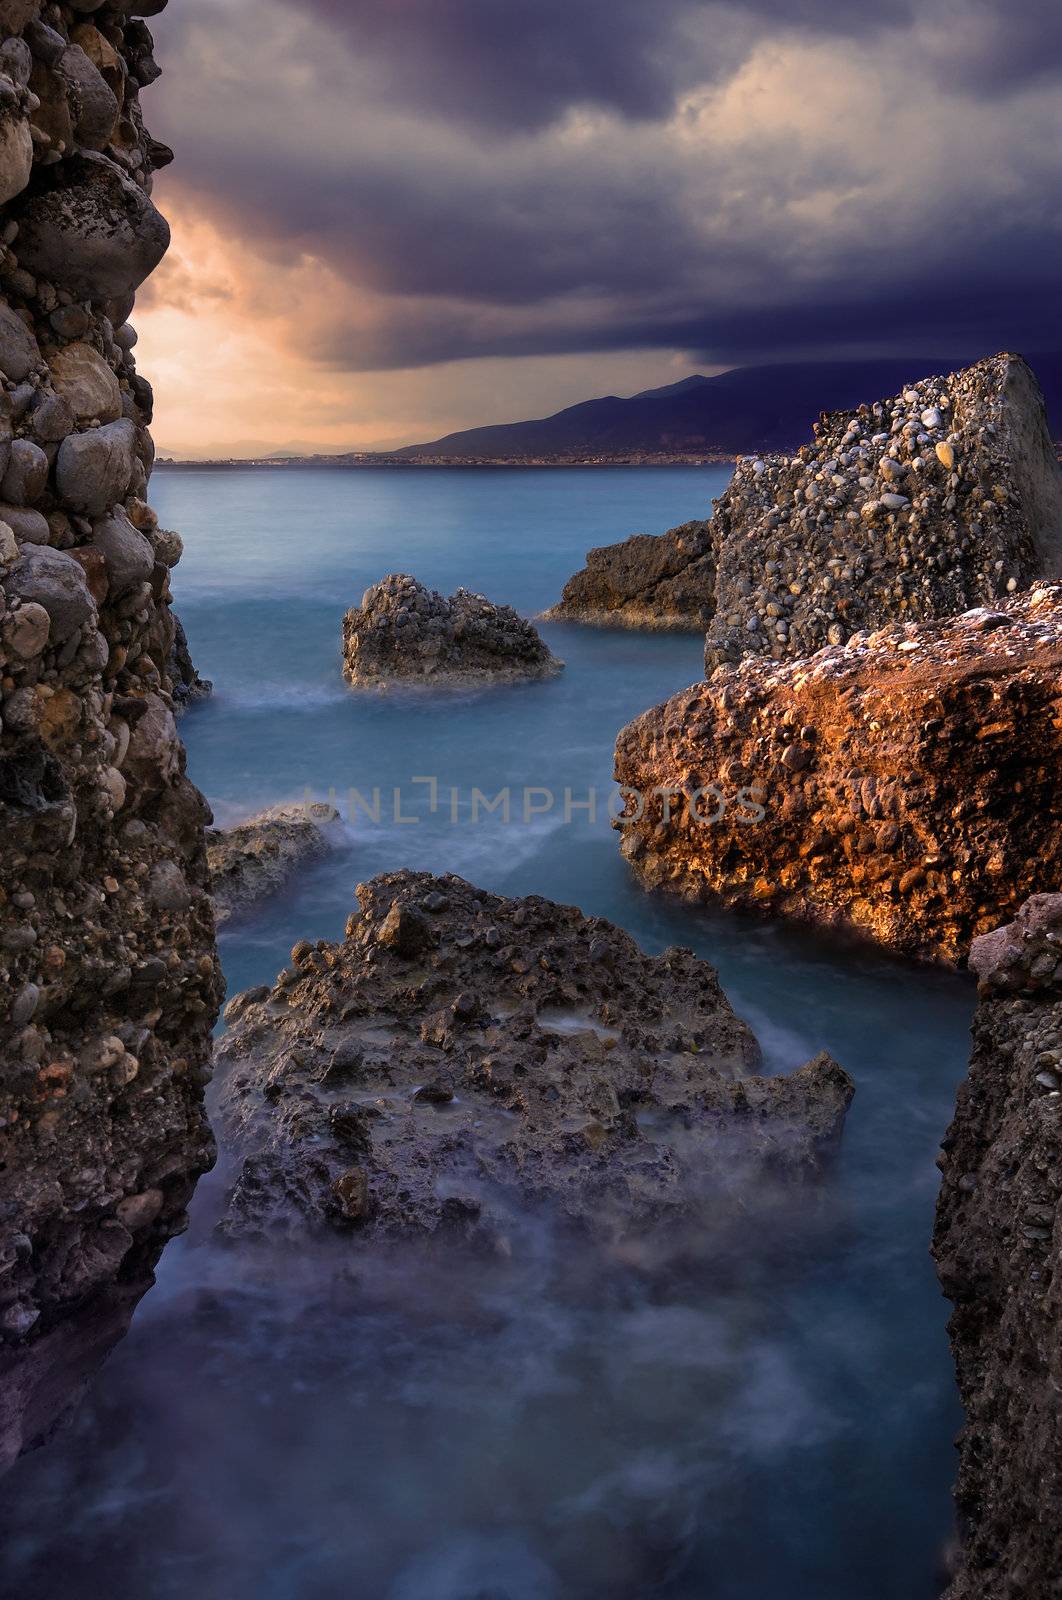 Image shows a rocky seascape during a windy late afternoon